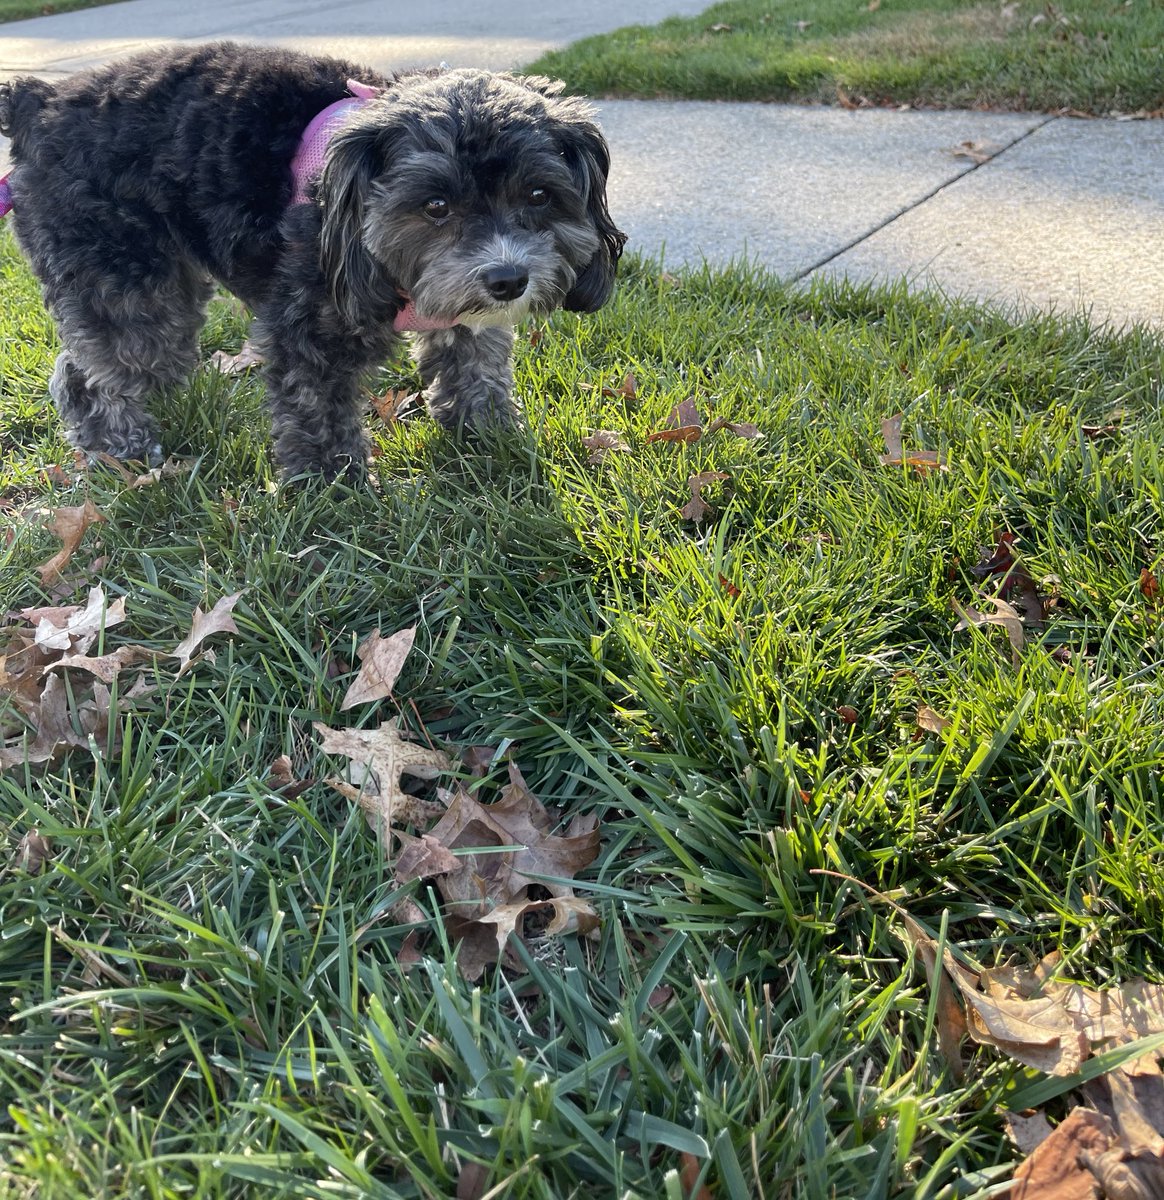 Me is giving these swirling brown zombs a hard stare. Mama calls them “autumn leaves”, but me is taking no chances on today’s pawtrol #ZSHQ #dogsoftwitter #DogsOnTwitter #dogs #AutumnVibes